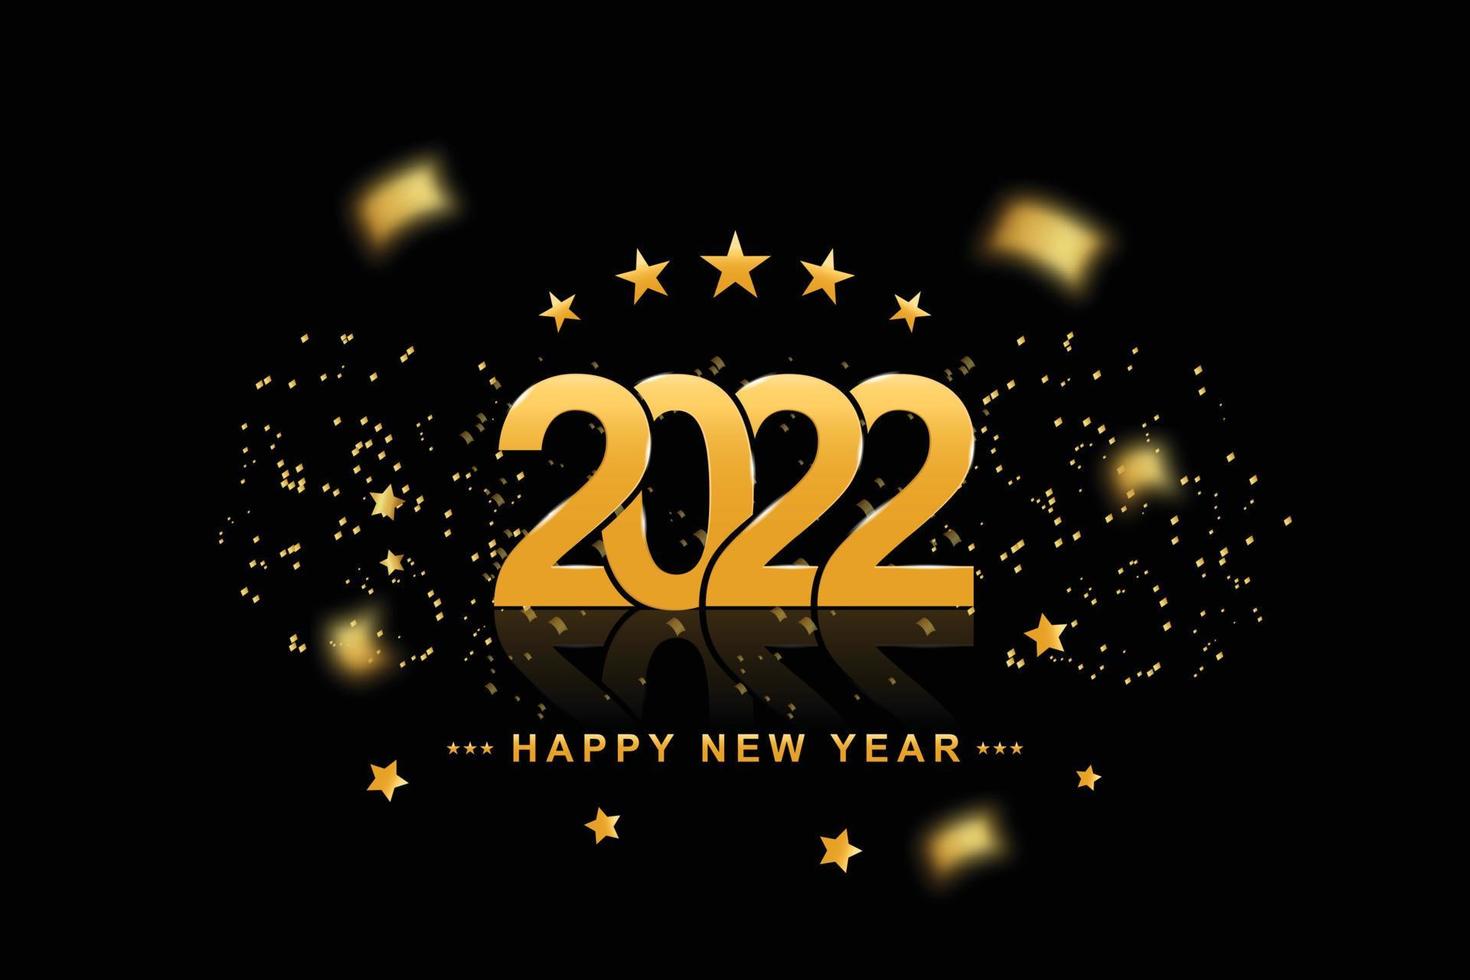 2022 Happy New Year elegant design - vector illustration of golden 2022 logo numbers on black background - perfect typography for 2022 save the date luxury designs and new year celebration.